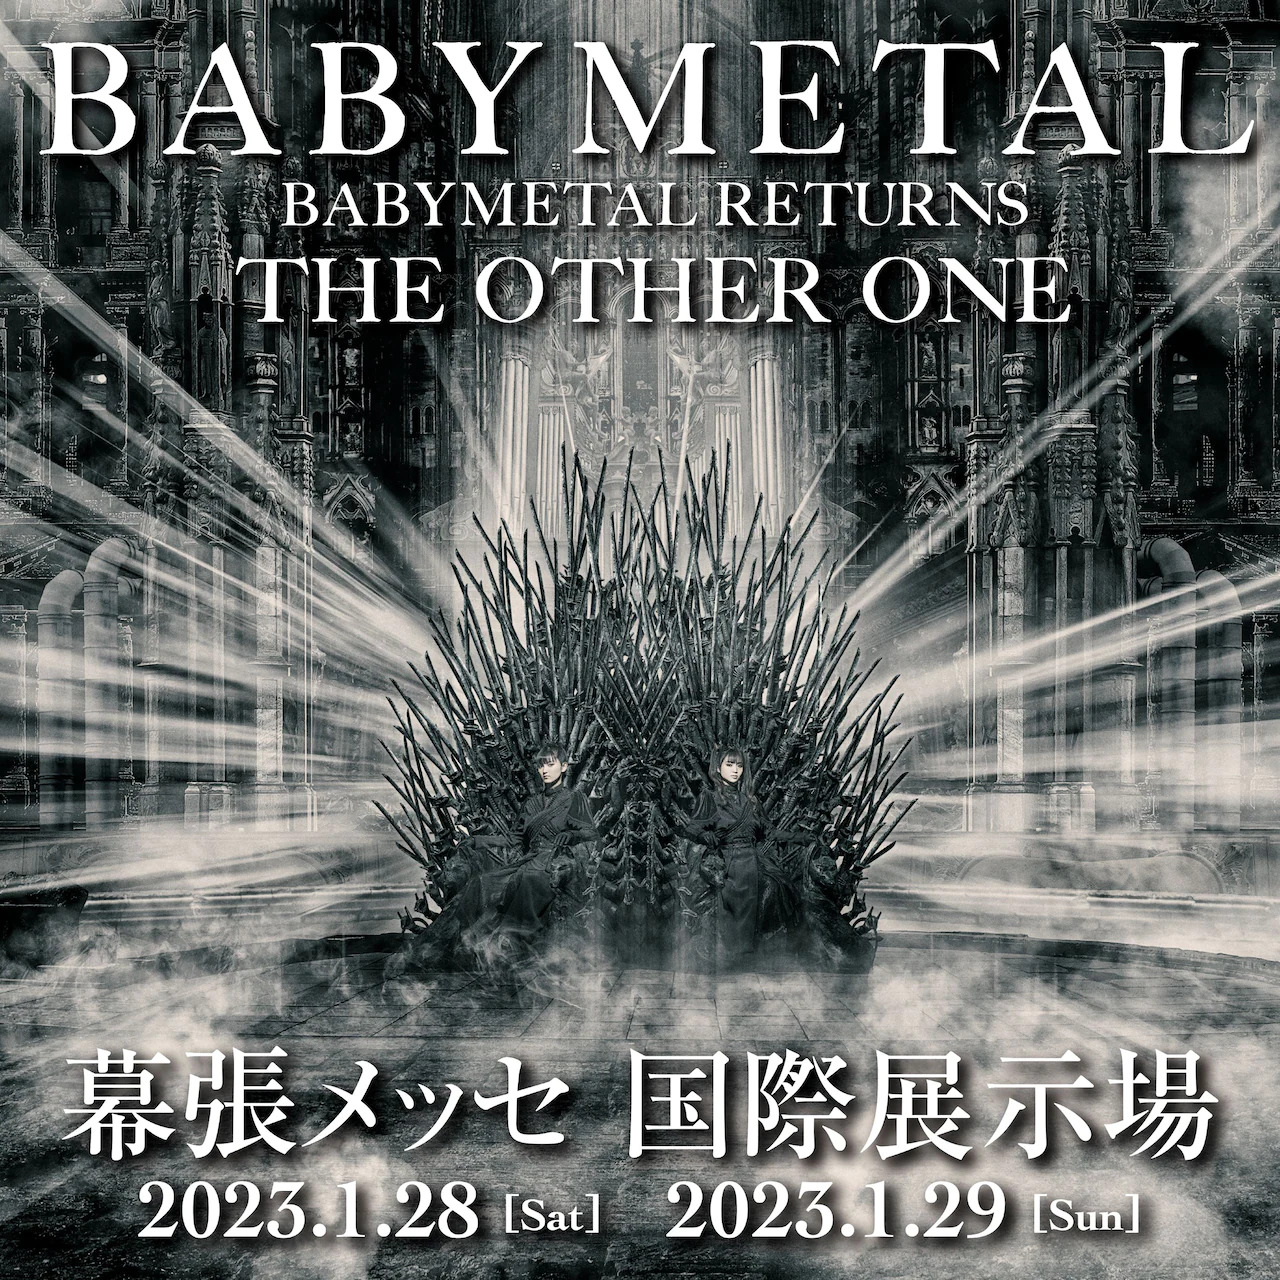 BABYMETAL RETURNS – THE OTHER ONE – “ Live Shows Announced For 